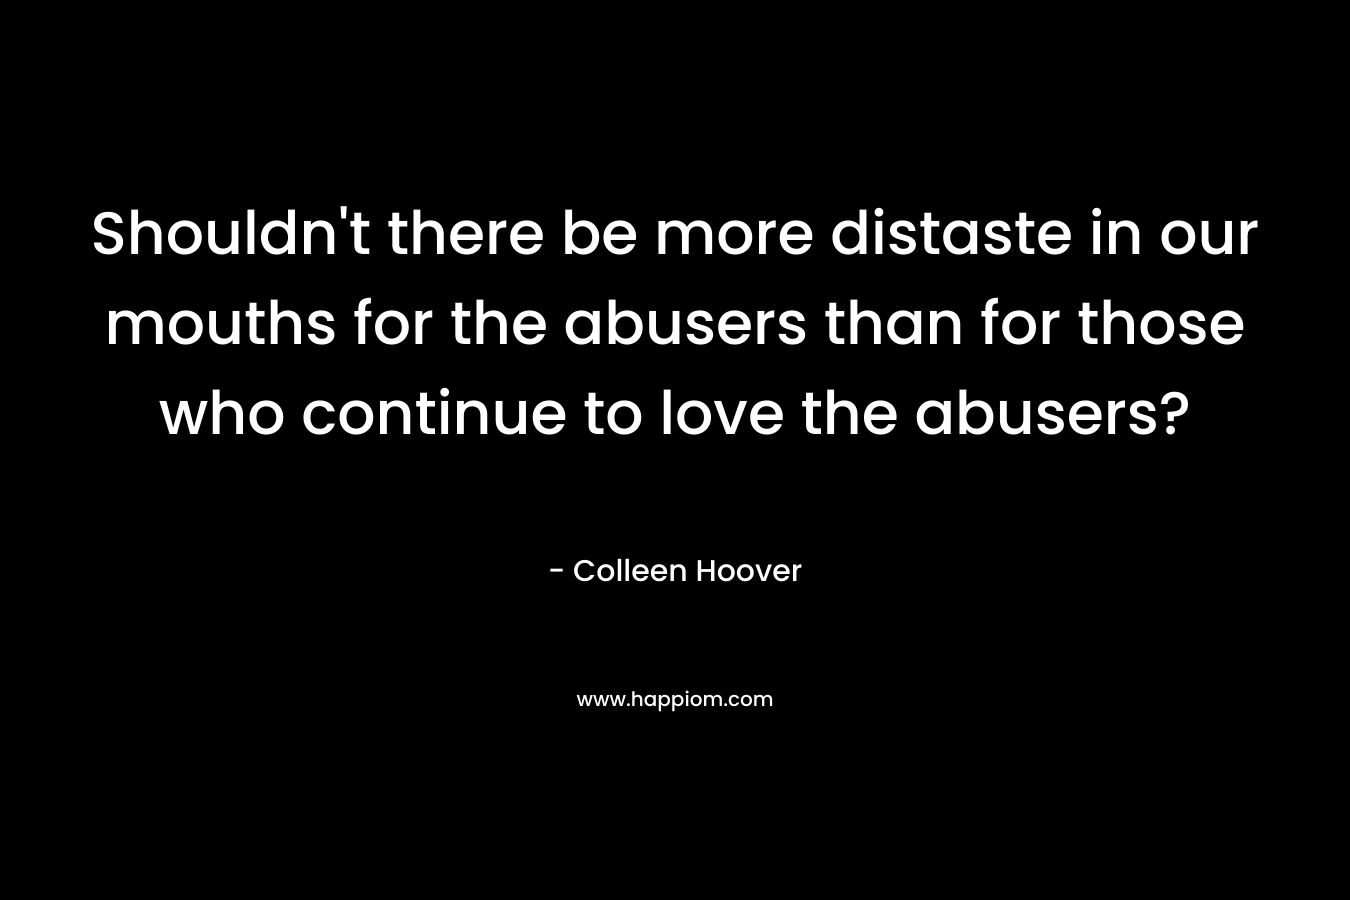 Shouldn’t there be more distaste in our mouths for the abusers than for those who continue to love the abusers? – Colleen Hoover